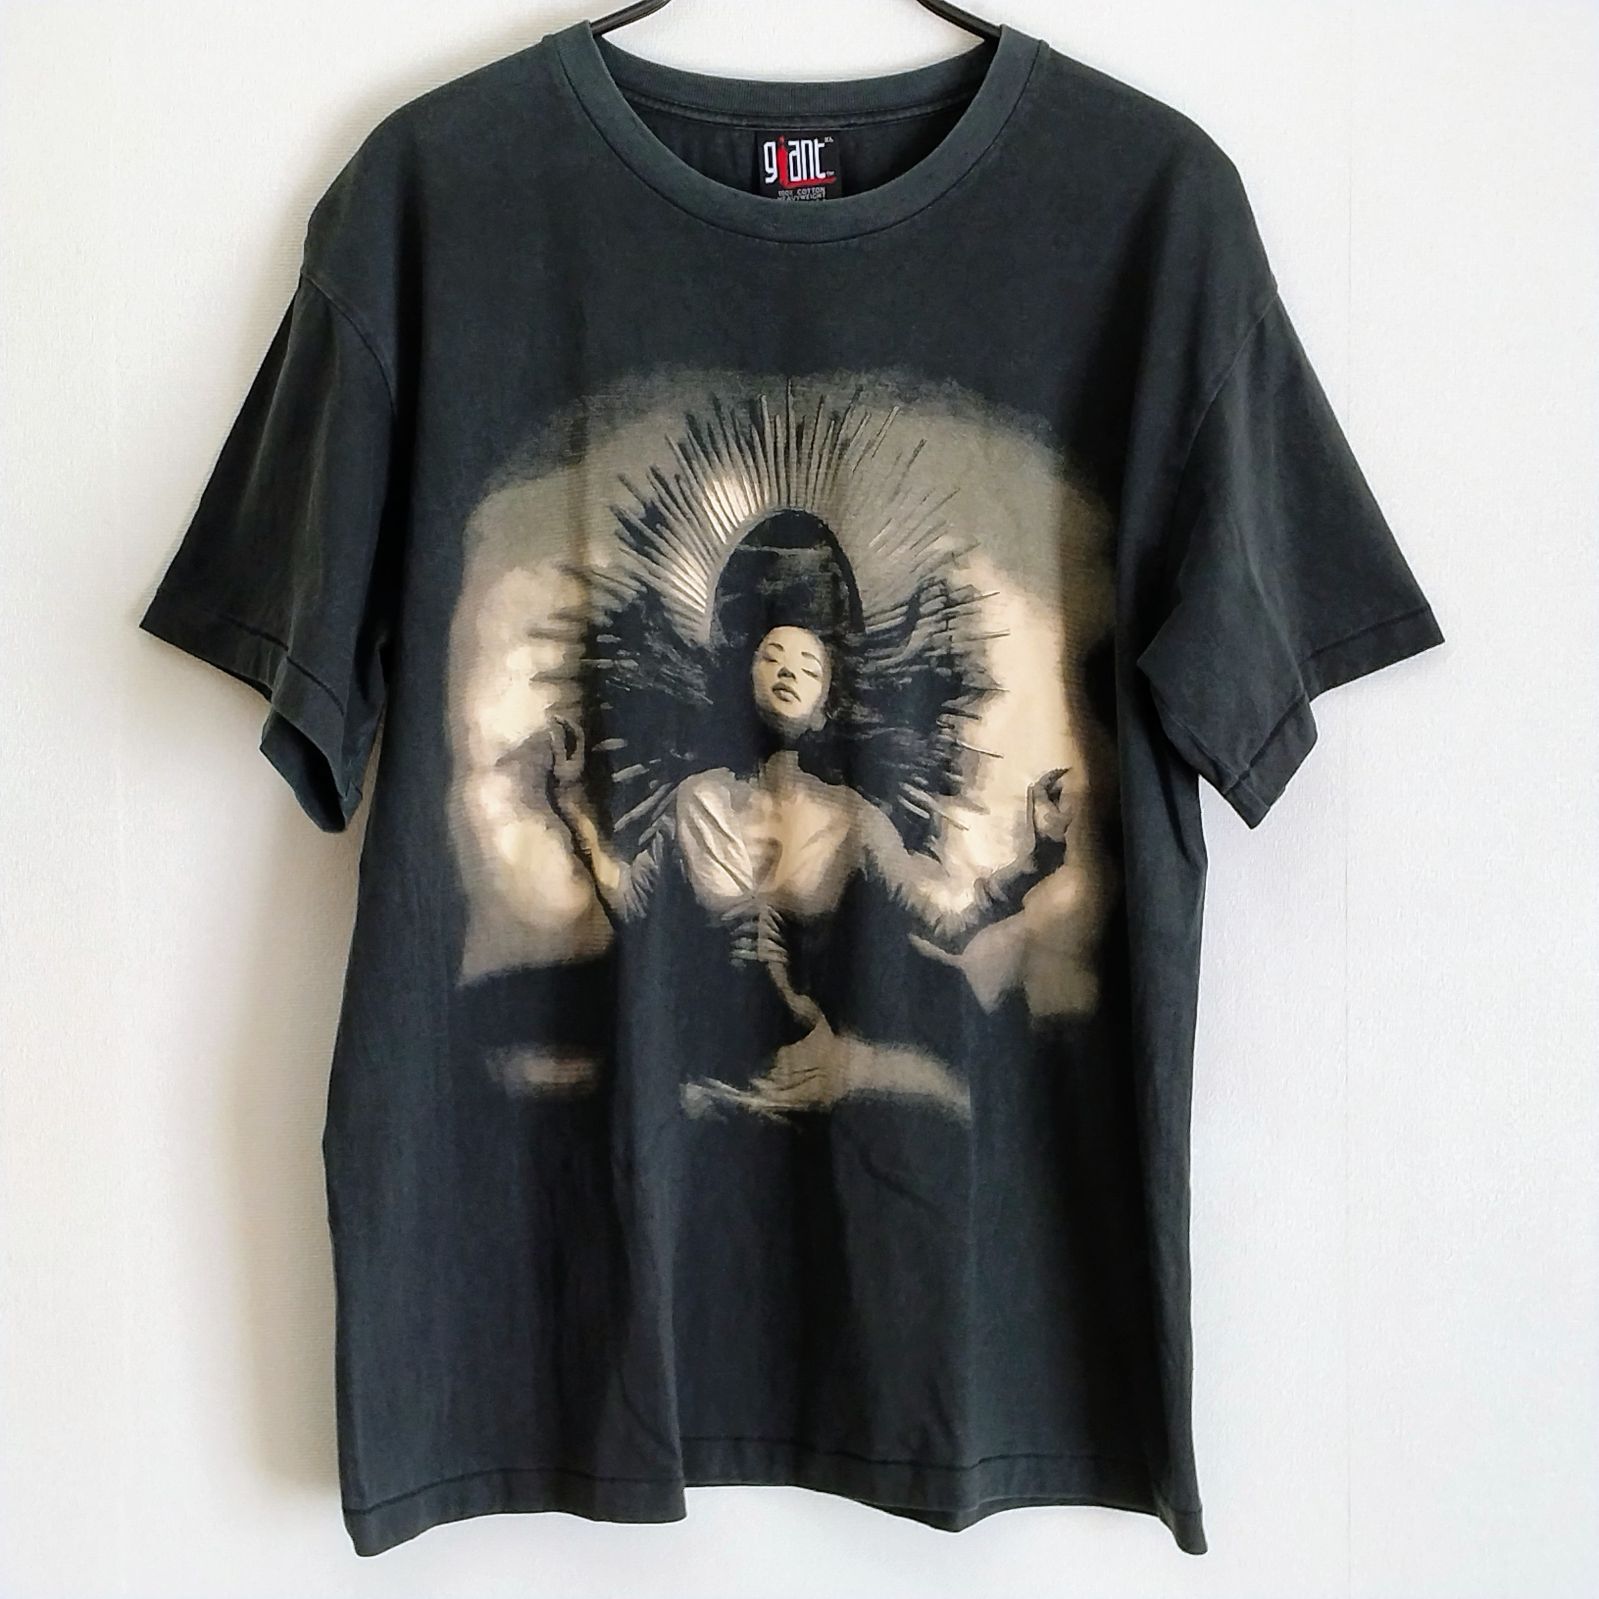 Sade SUMMER DELUXE Tシャツ Kanye West着用 シャーデー サマー ...